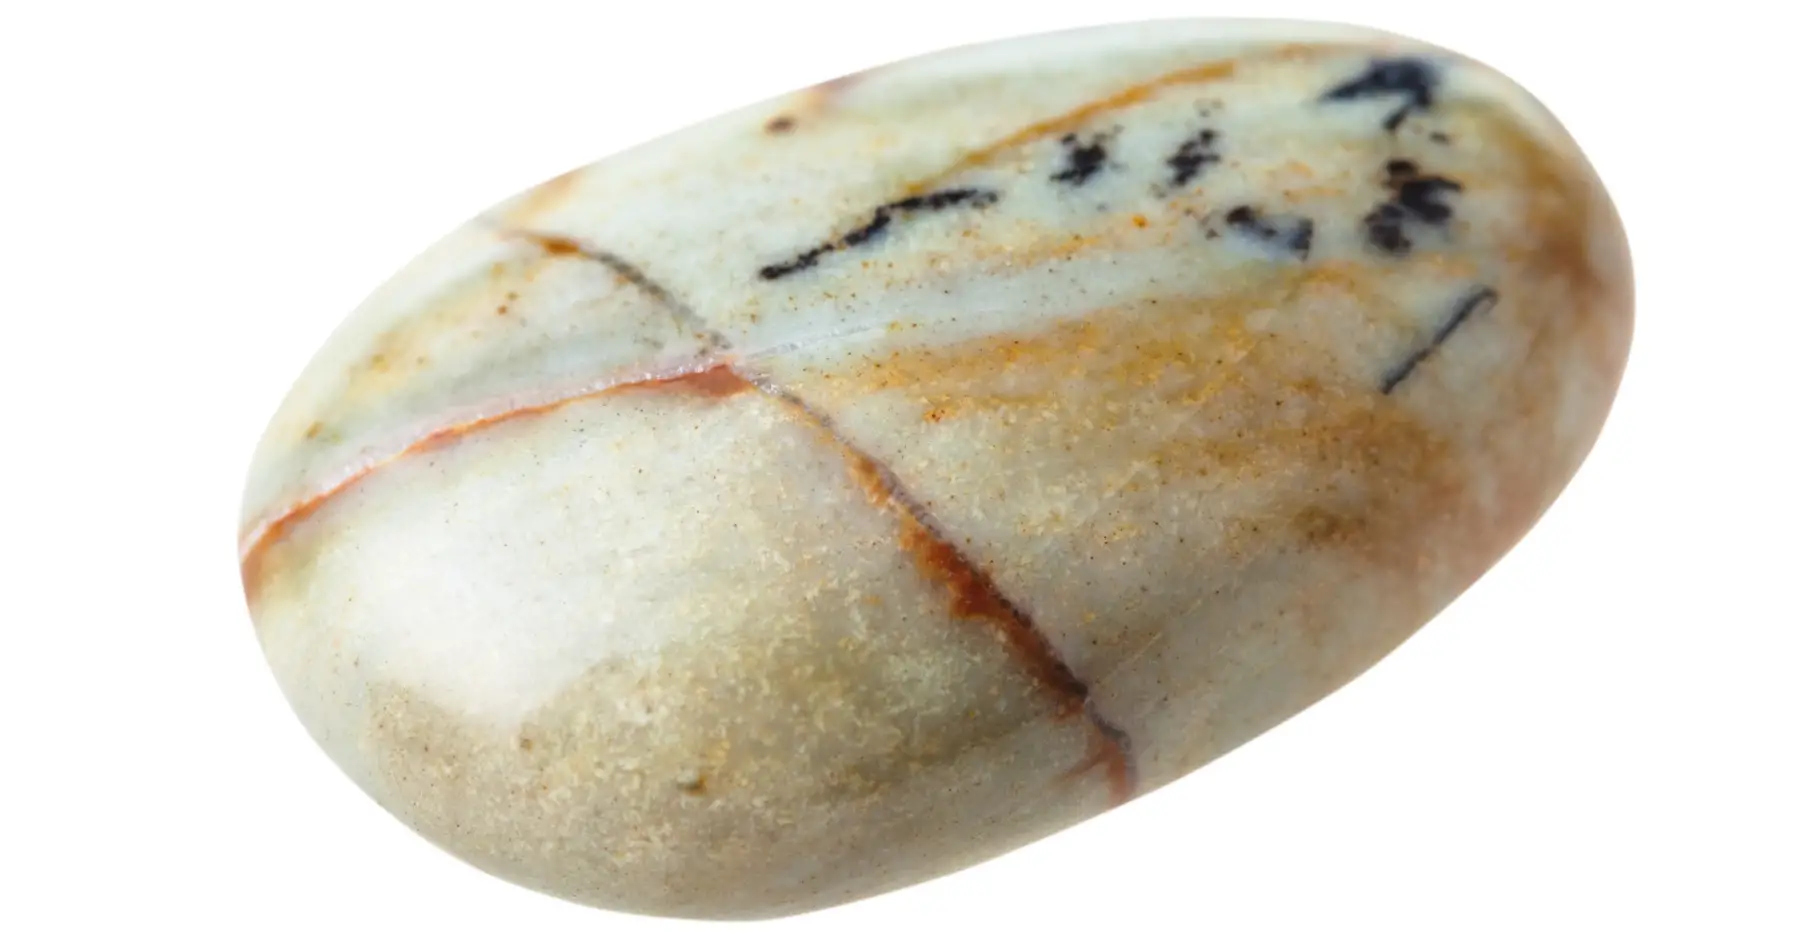 How To Identify Jasper? : Guide along with Tips and Tricks